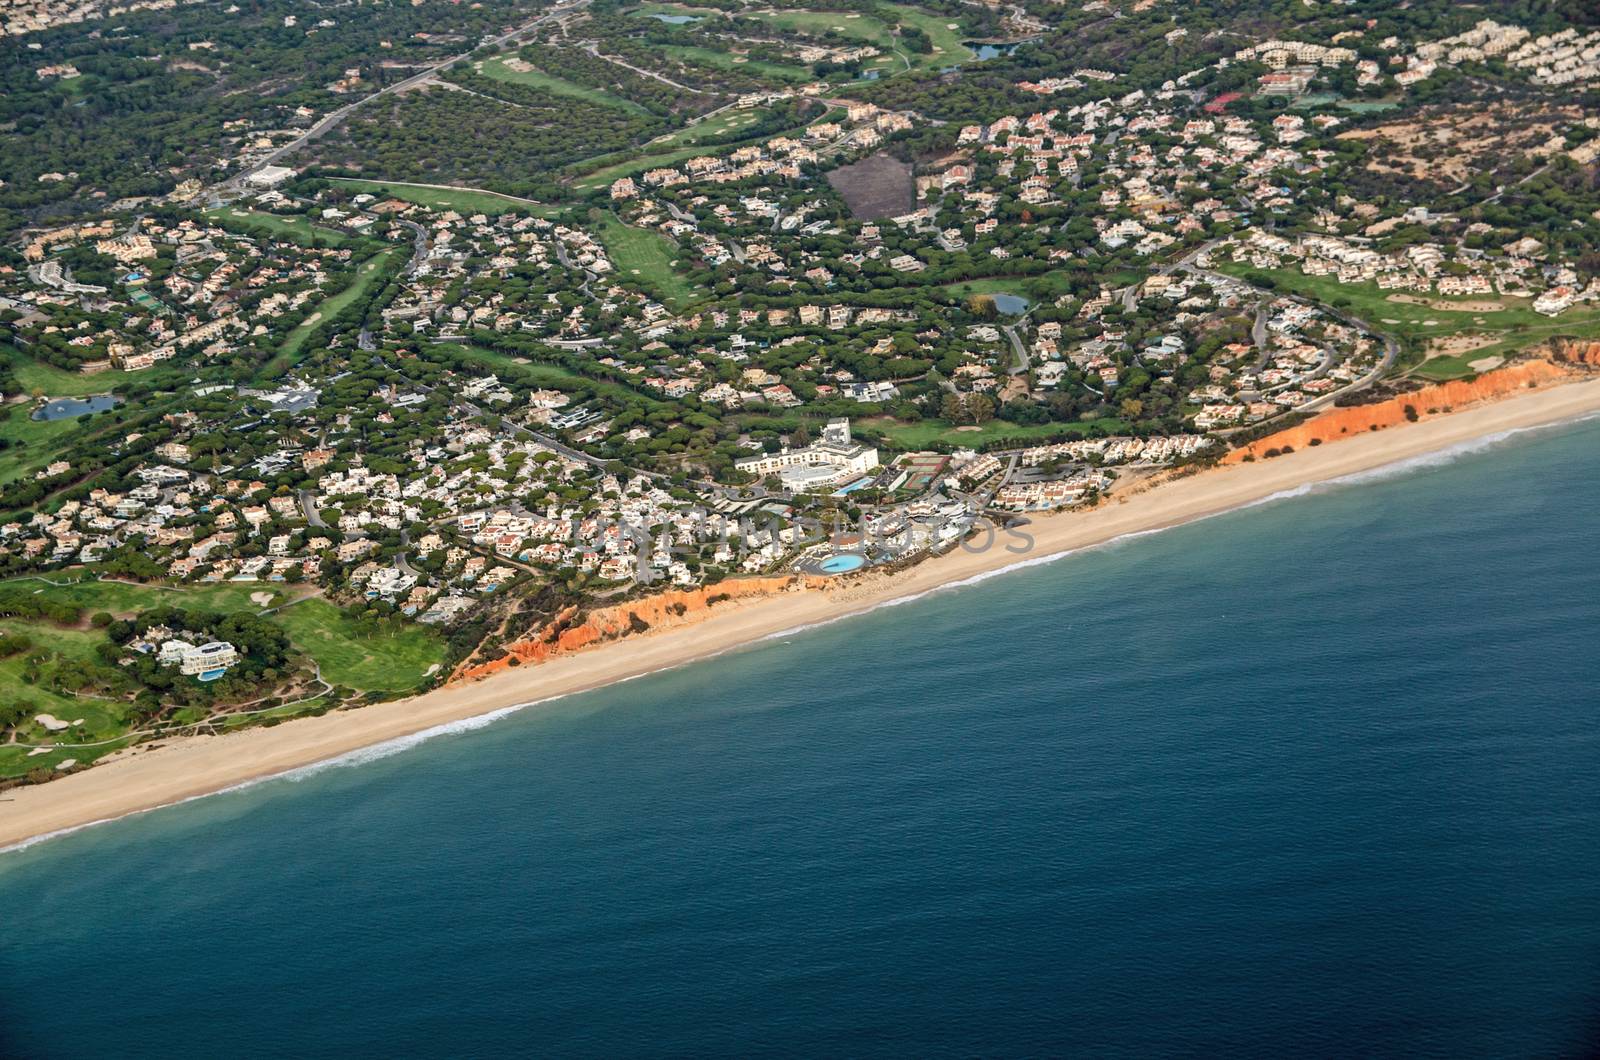 Aerial view of the coastal resort of Praia de Vale Do Lobo on the Algarve coast in Faro, Portugal.  The 5 star Dona Filipa Hotel is in the middle of the shot with golf courses and tennis courts as well as the sandy beach.